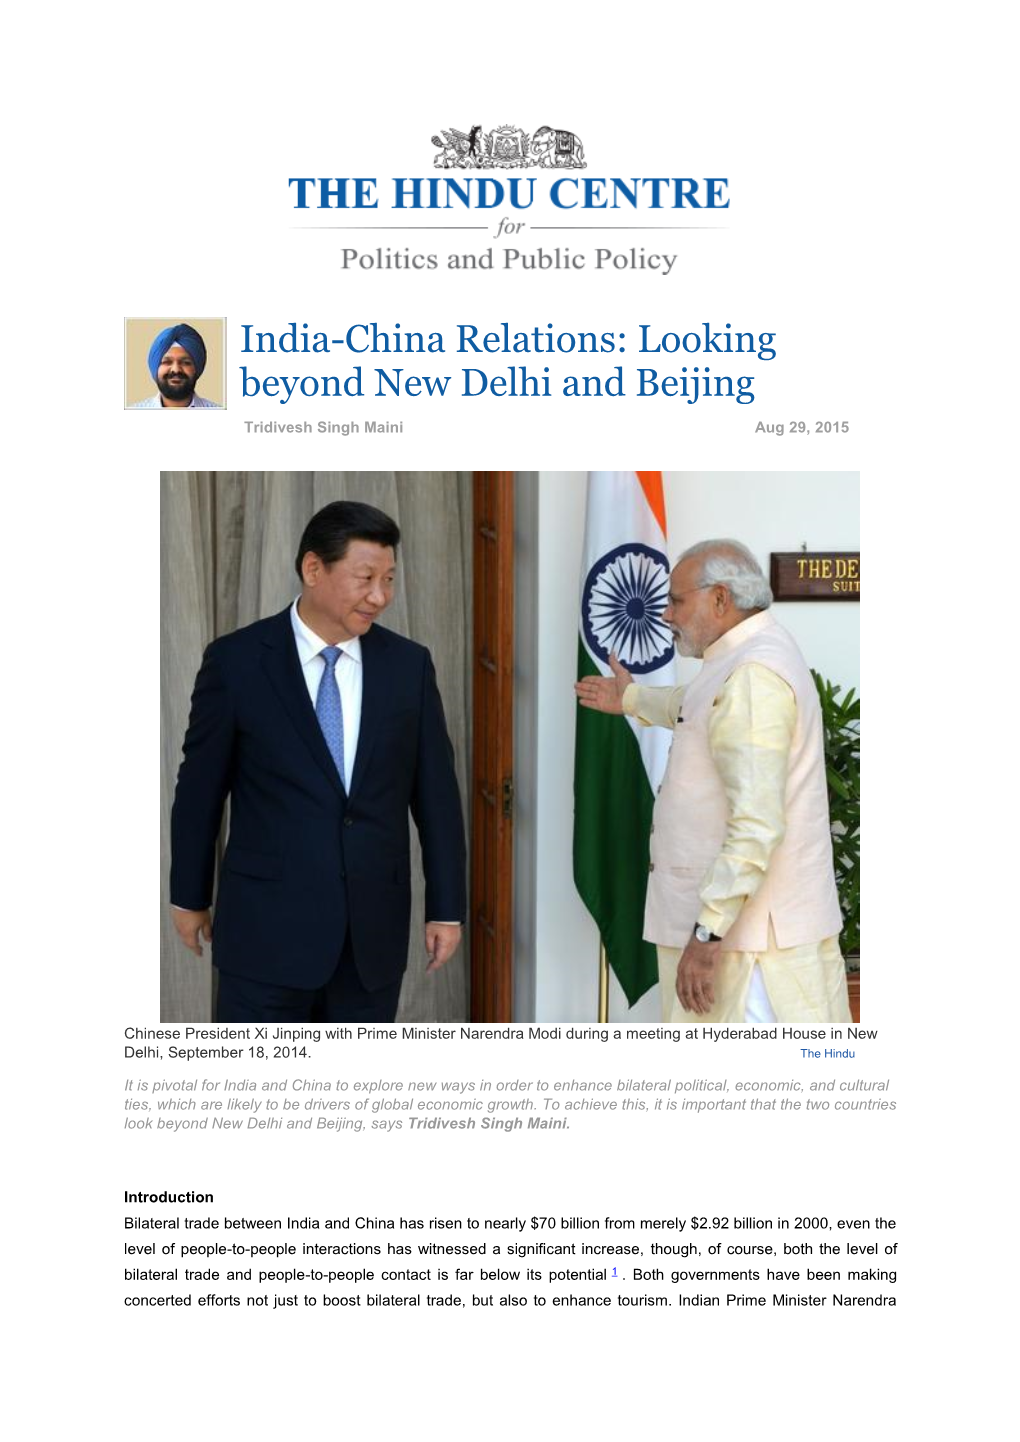 India-China Relations: Looking Beyond New Delhi and Beijing